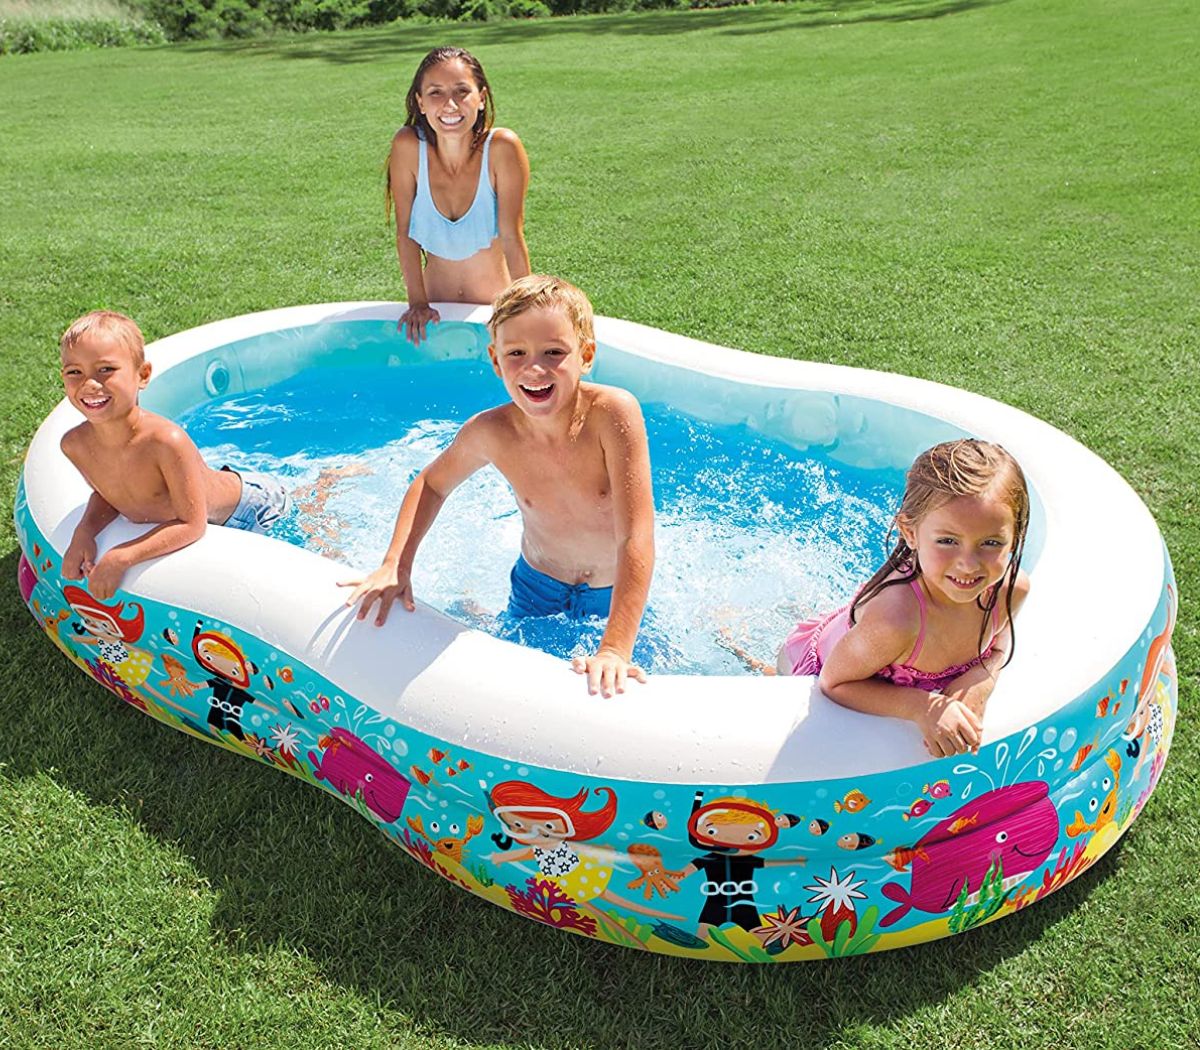 Mom with 3 kids relaxing in an oval inflatable pool